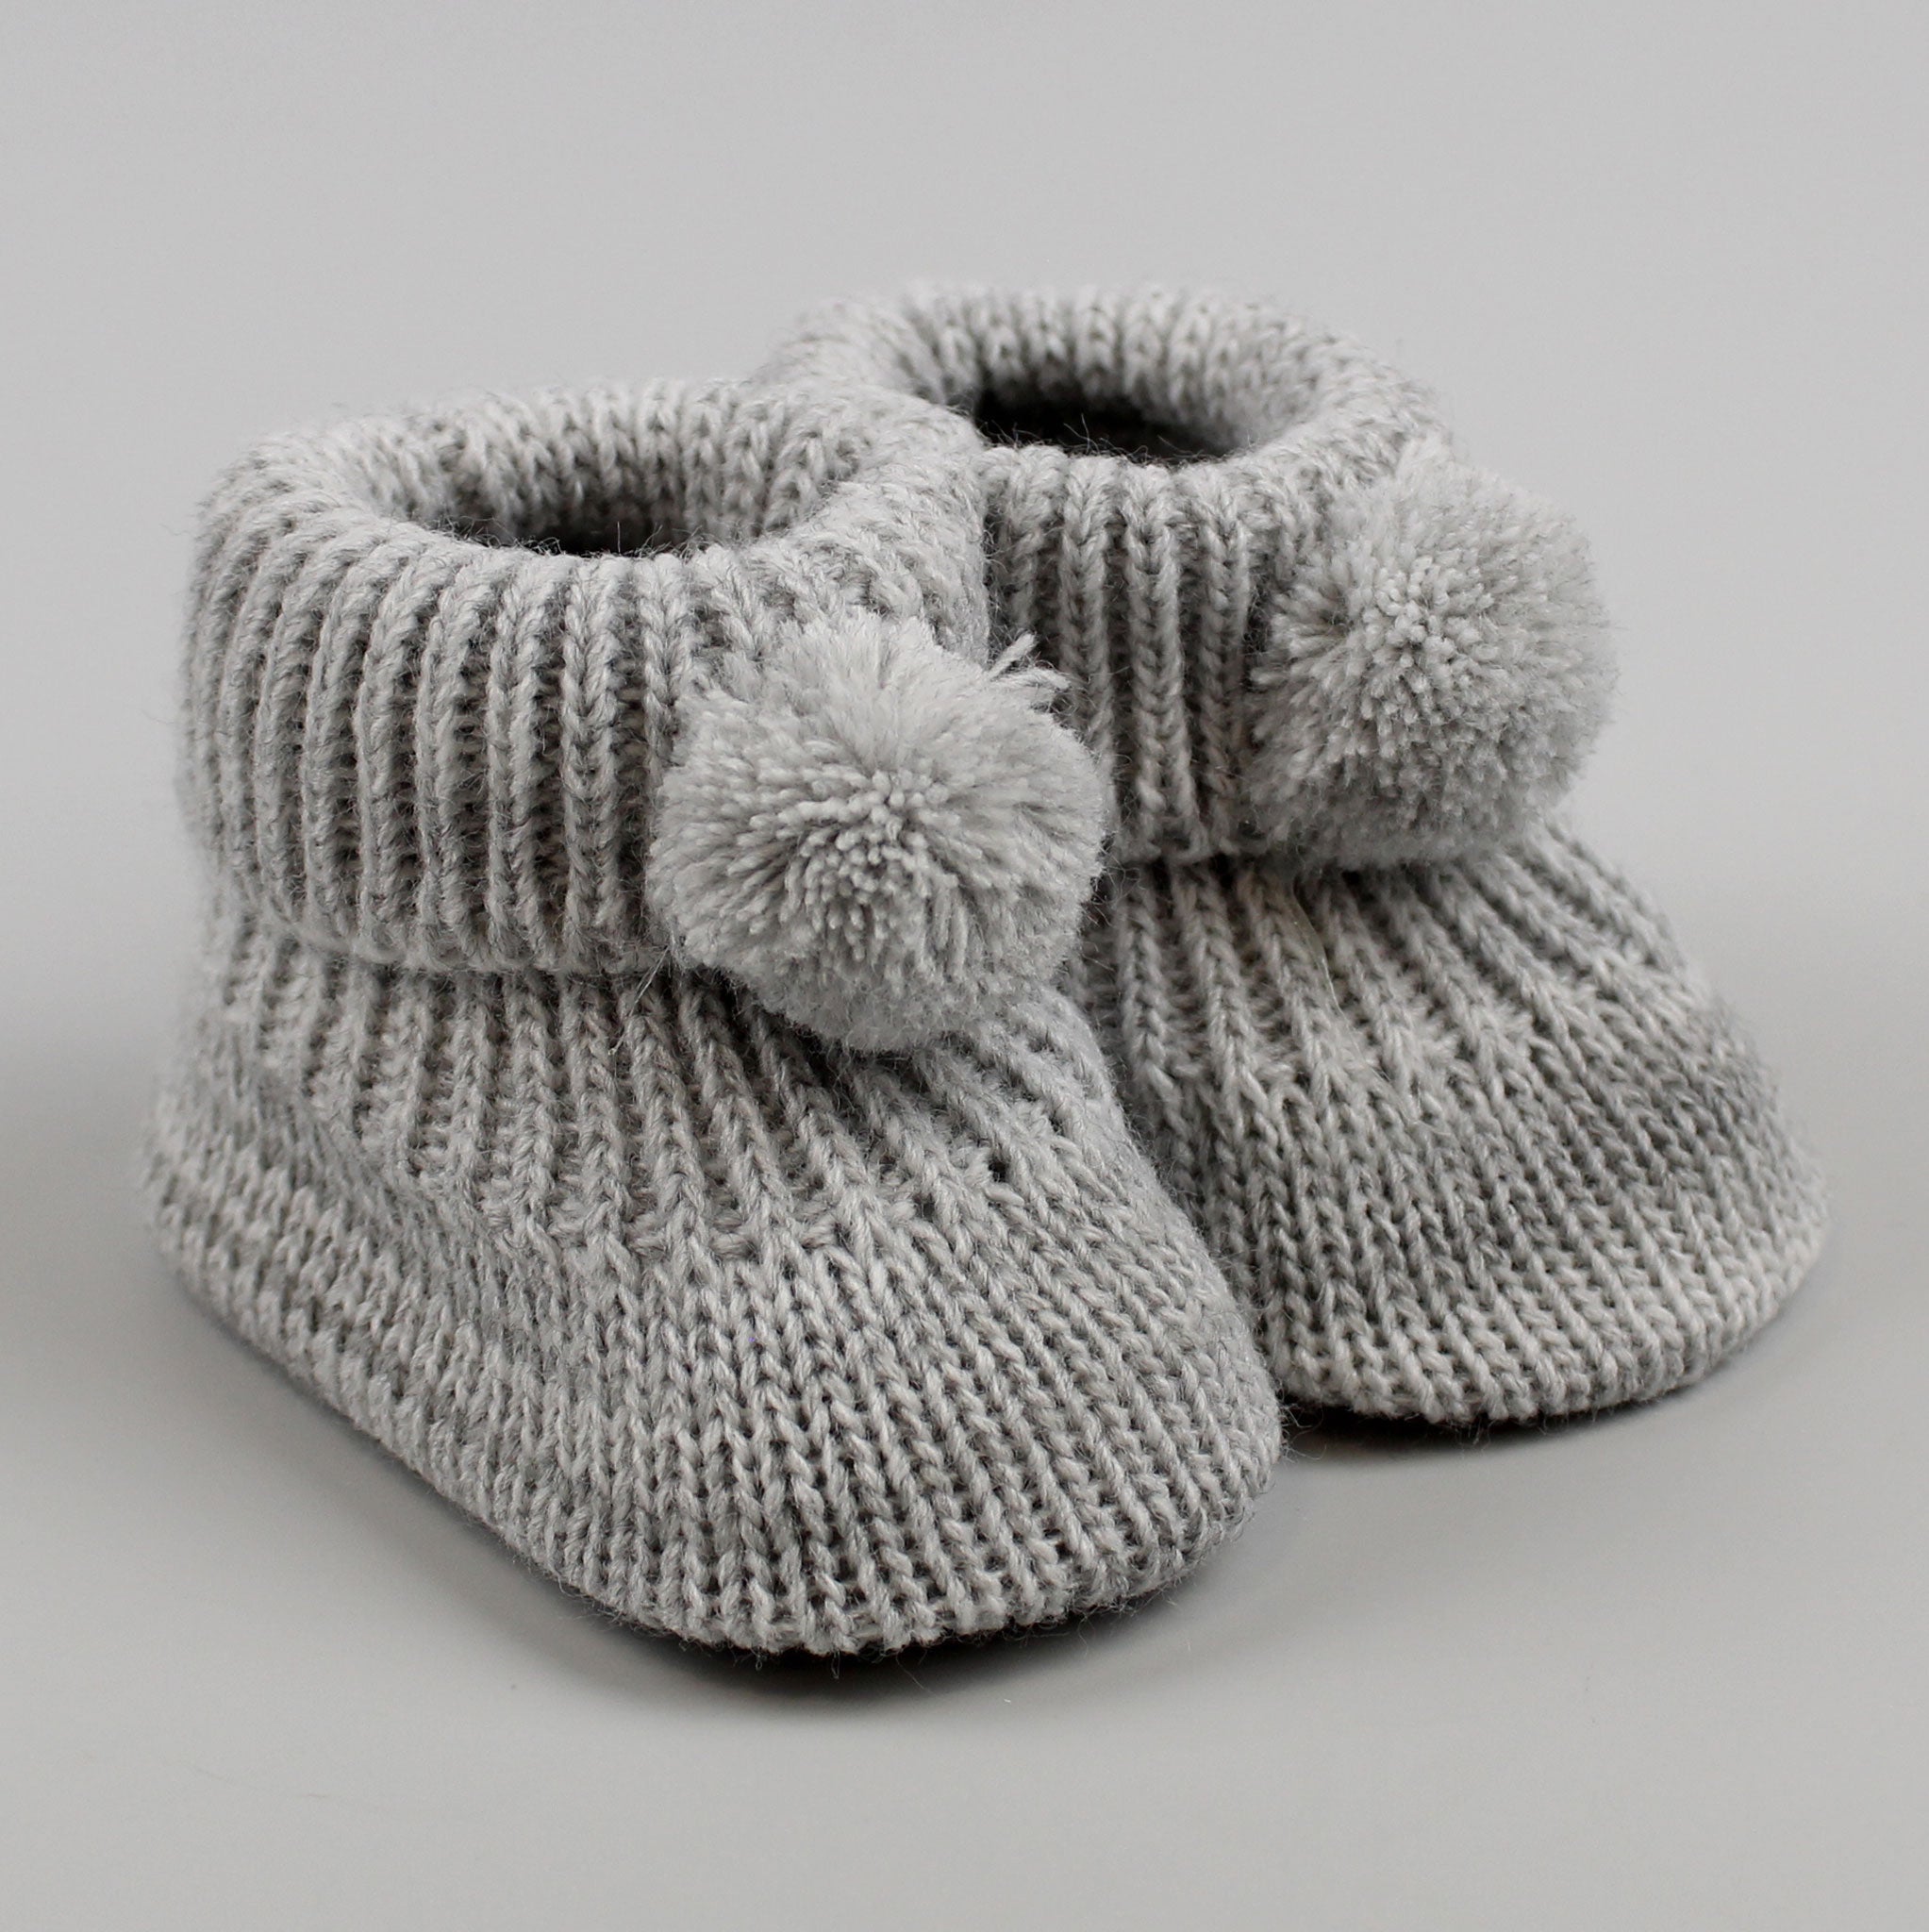 Grey Baby Booties with pom poms Newborn to 6 months